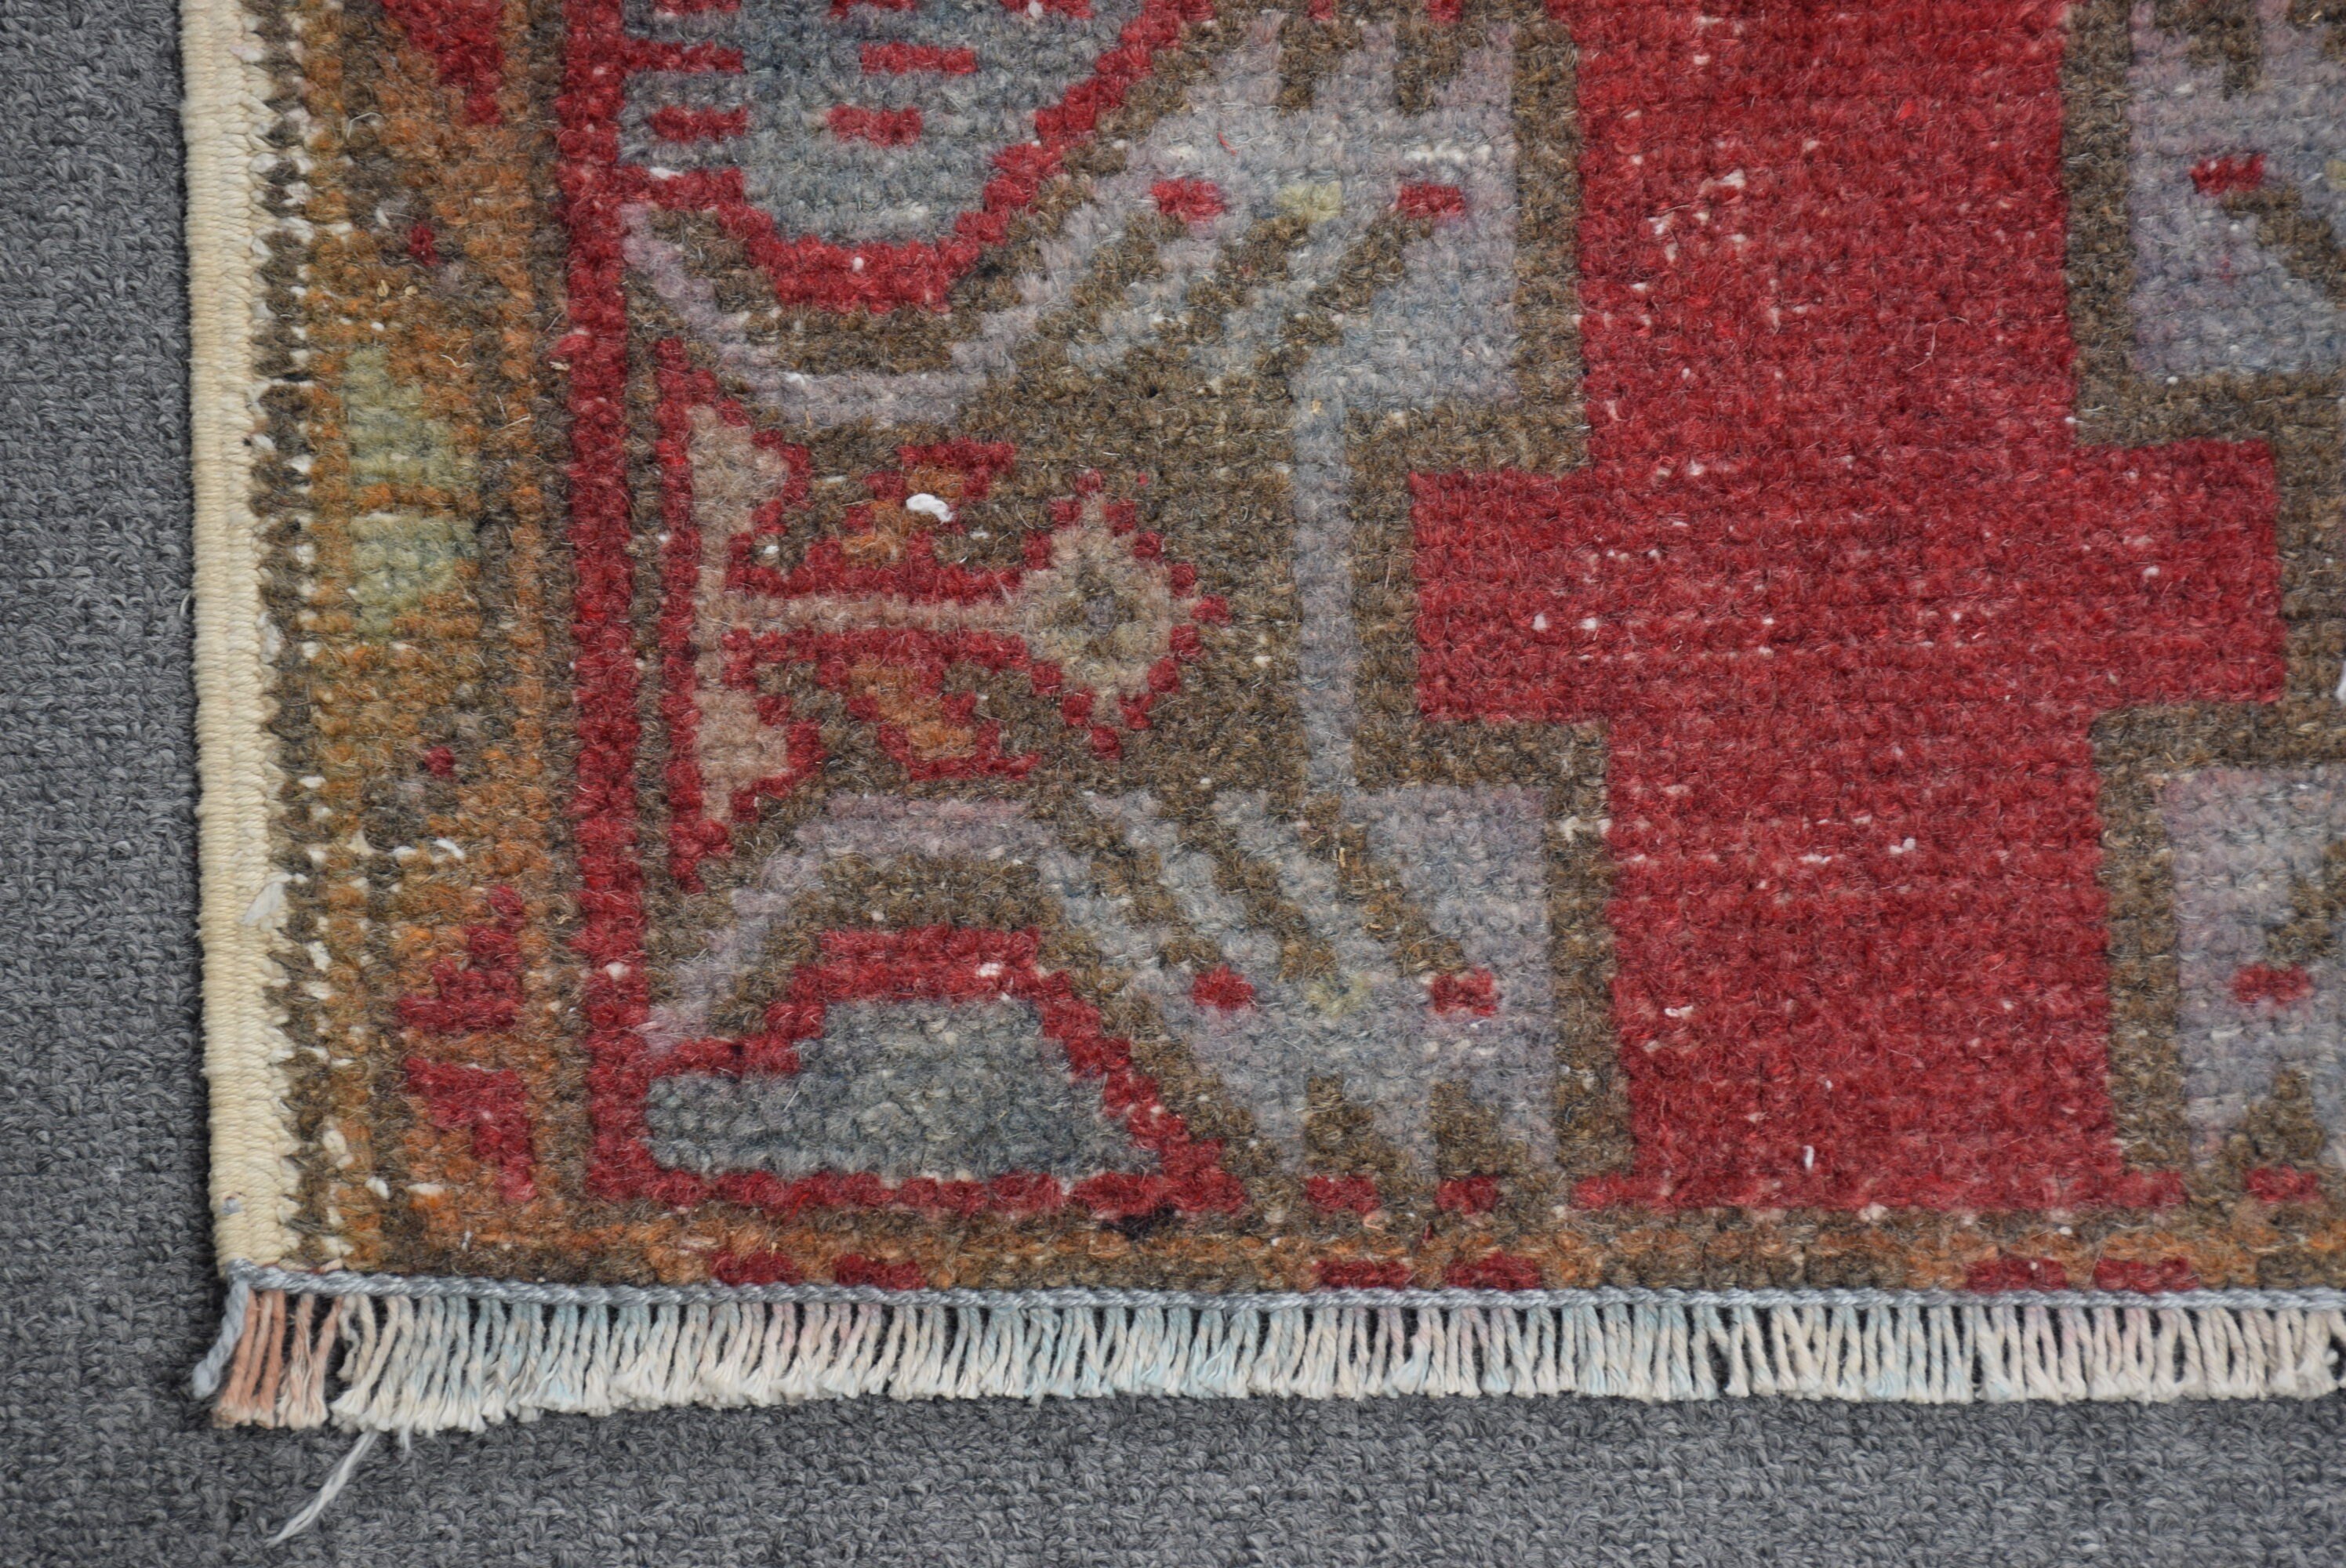 Wall Hanging Rug, Vintage Rugs, Turkish Rug, Car Mat Rug, Antique Rug, Cool Rug, 1.7x3 ft Small Rug, Rugs for Wall Hanging, Red Wool Rug